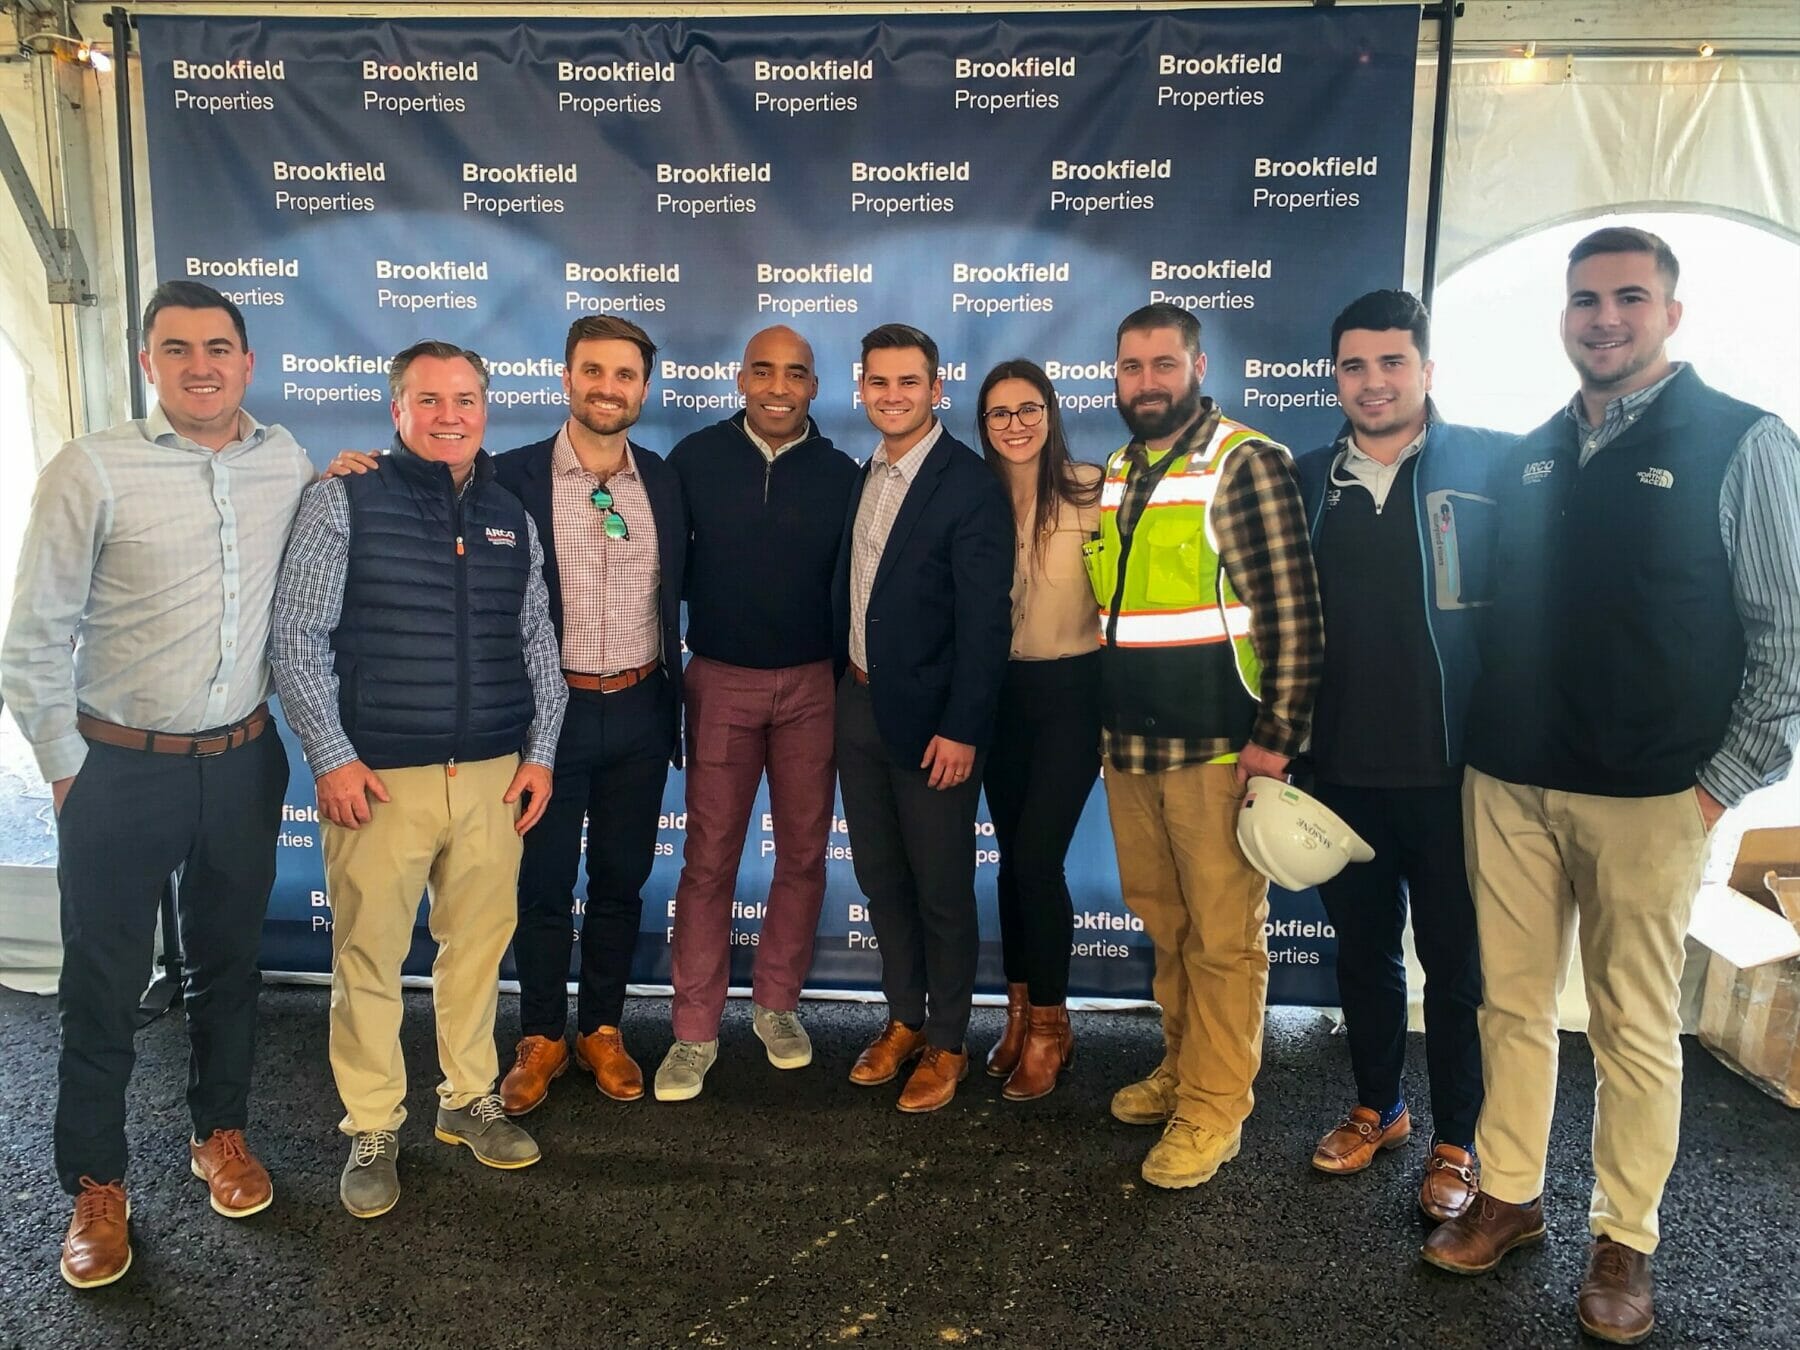 Group photo of ARCO team with Tiki Barber